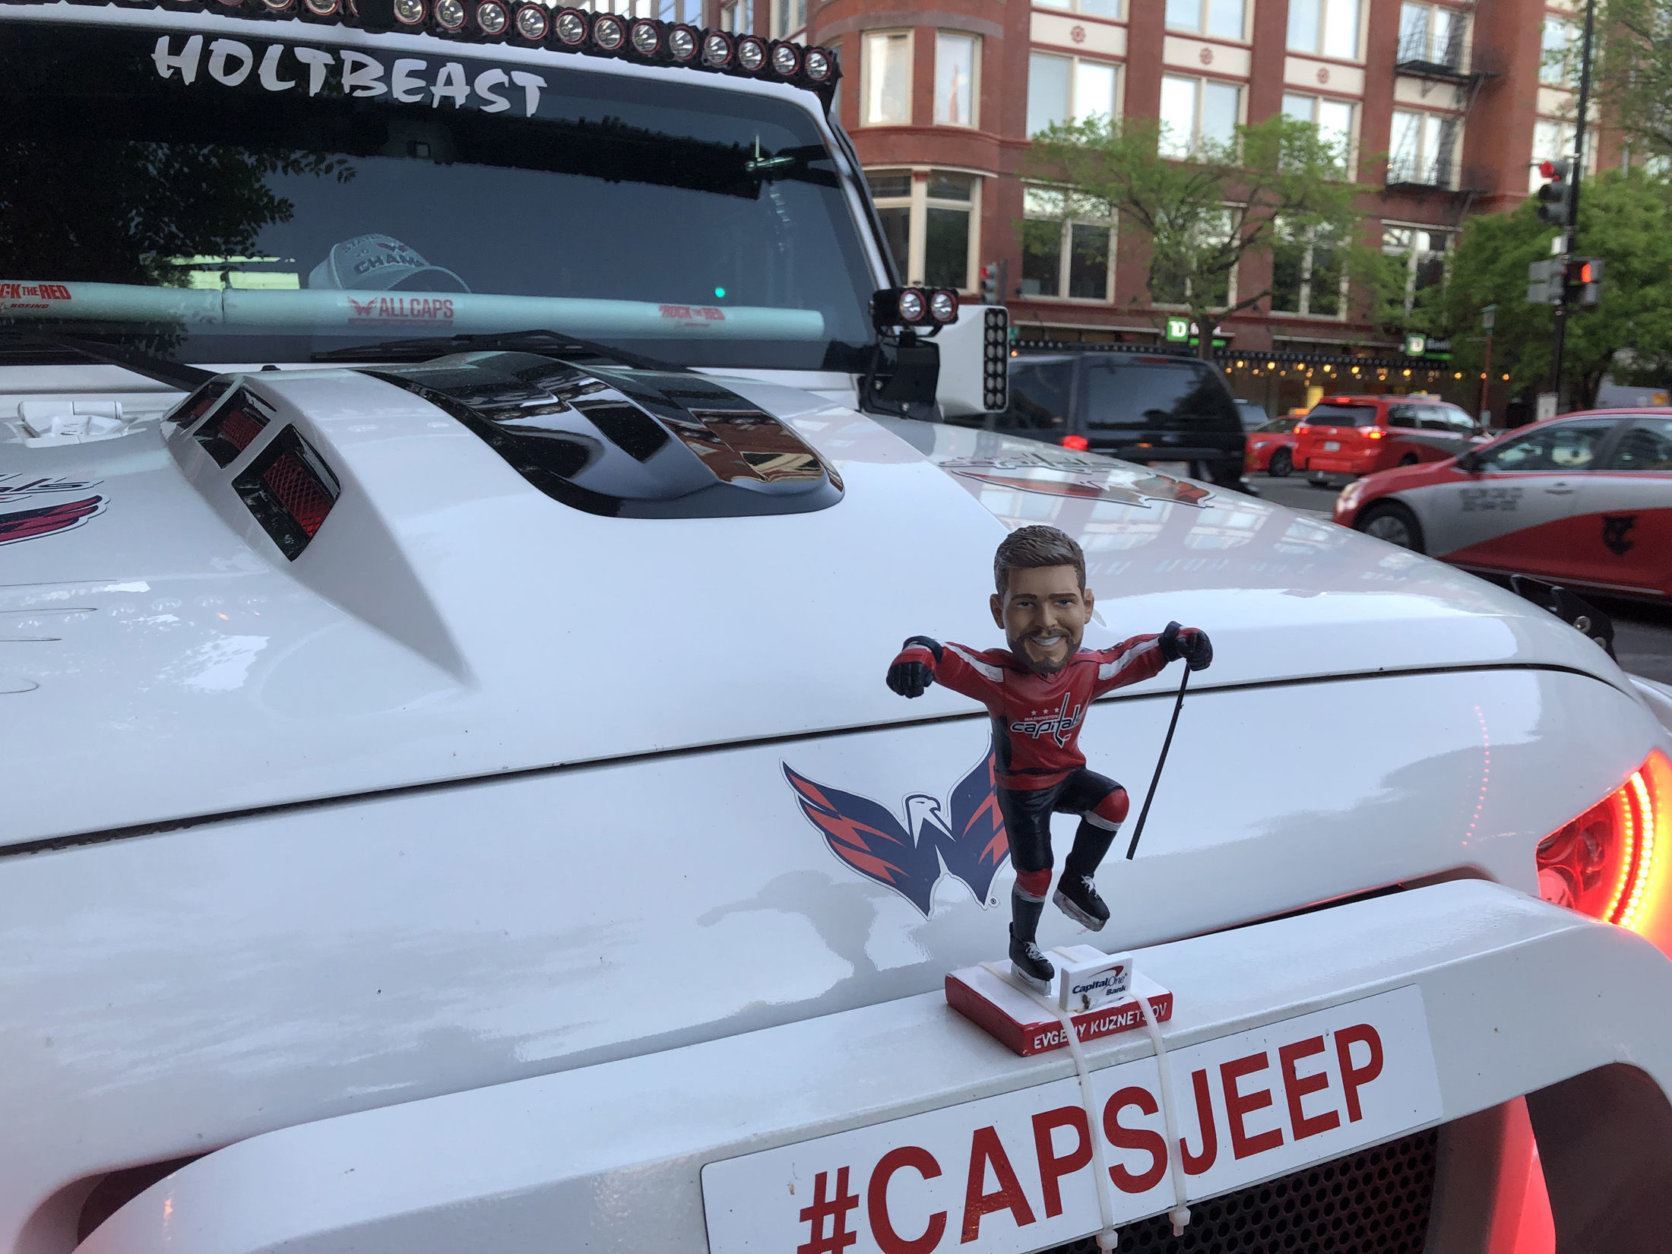 This Jeep is complete with a fitting hood ornament as well -- a bobblehead of Evgeny Kuznetsov. (WTOP/Mike Murillo)